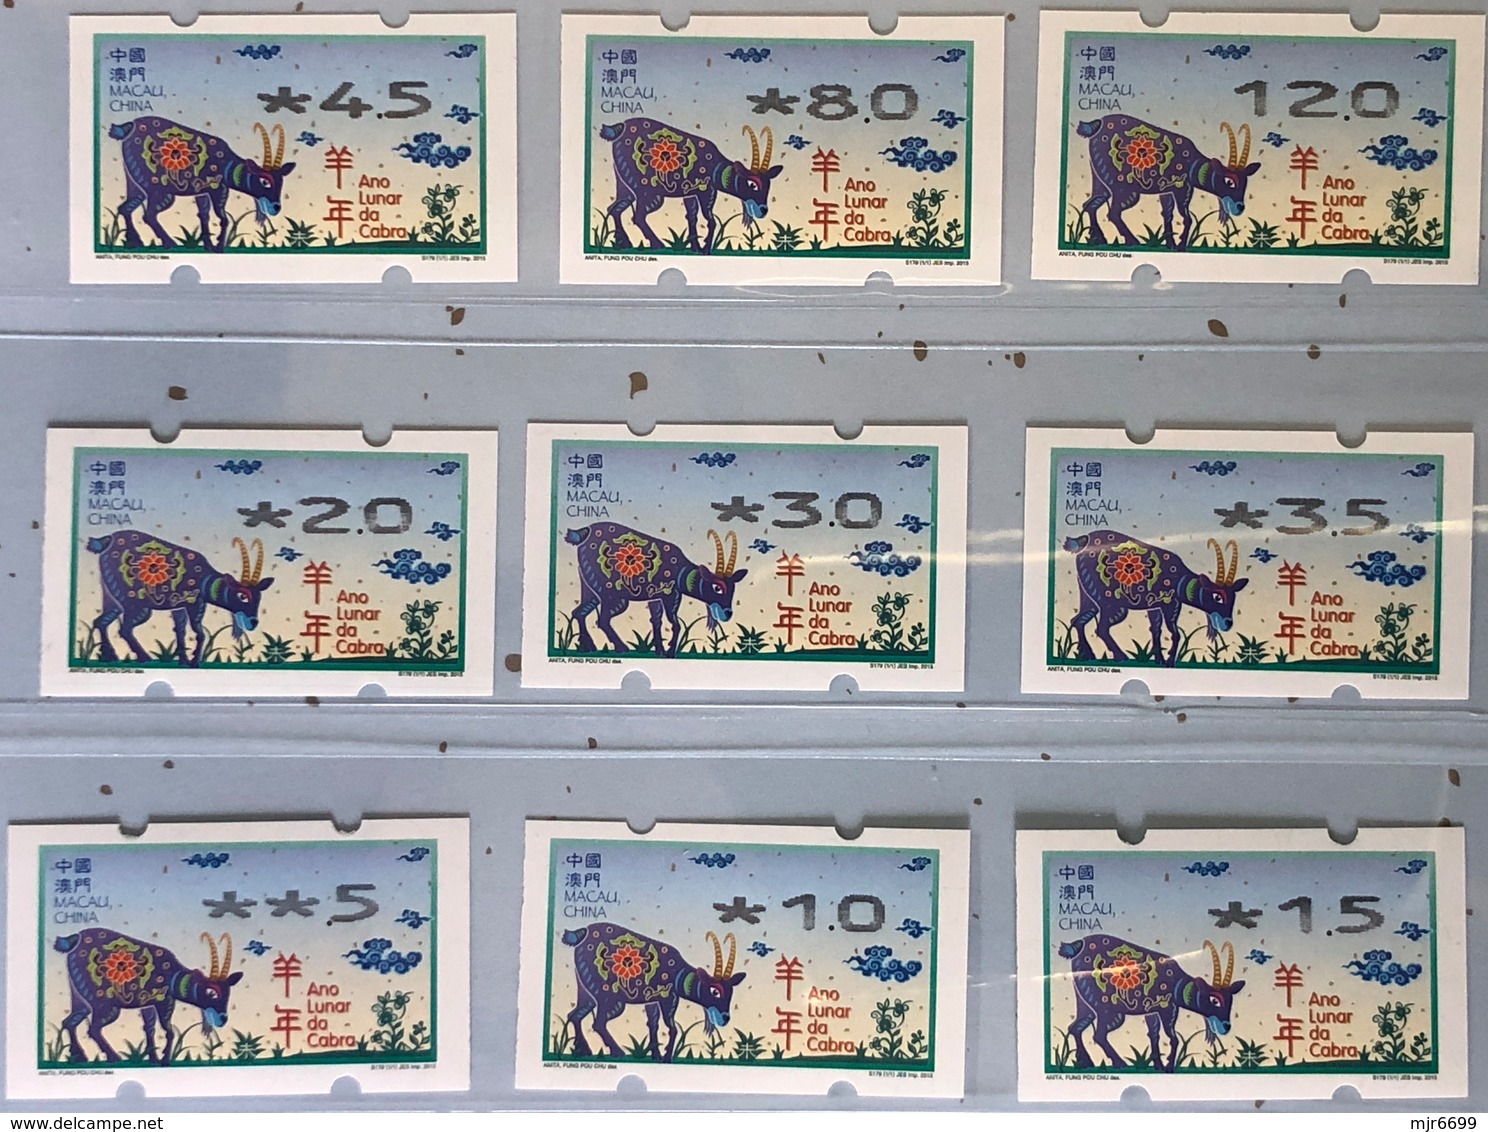 MACAU ATM LABELS, ZODIAC NEW YEAR OF THE GOAT ISSUE COMPLETE SET NAGLER 104 ALL FINE UM MINT - Automatenmarken